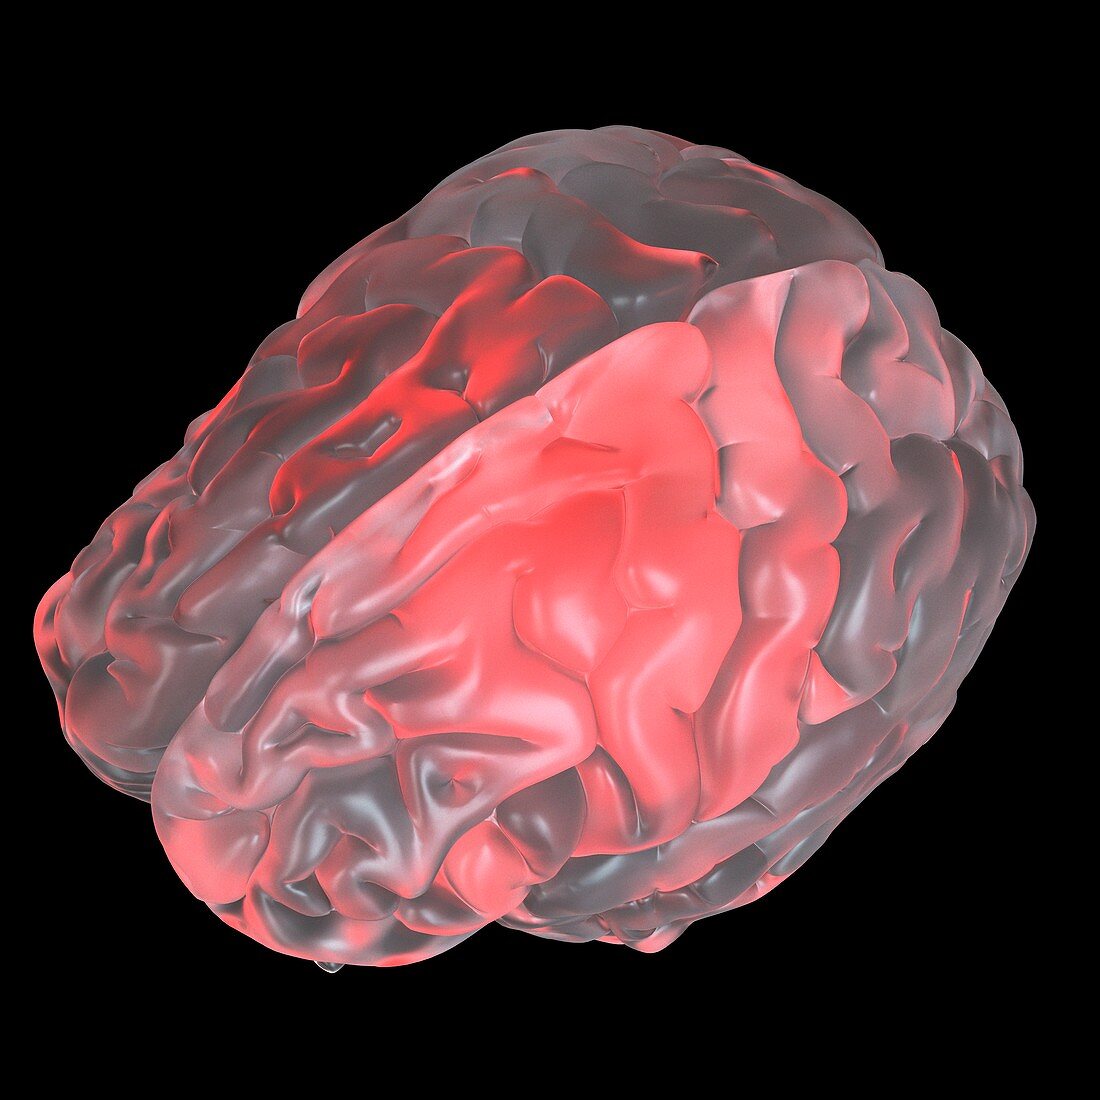 Illustration of a red glowing glass brain